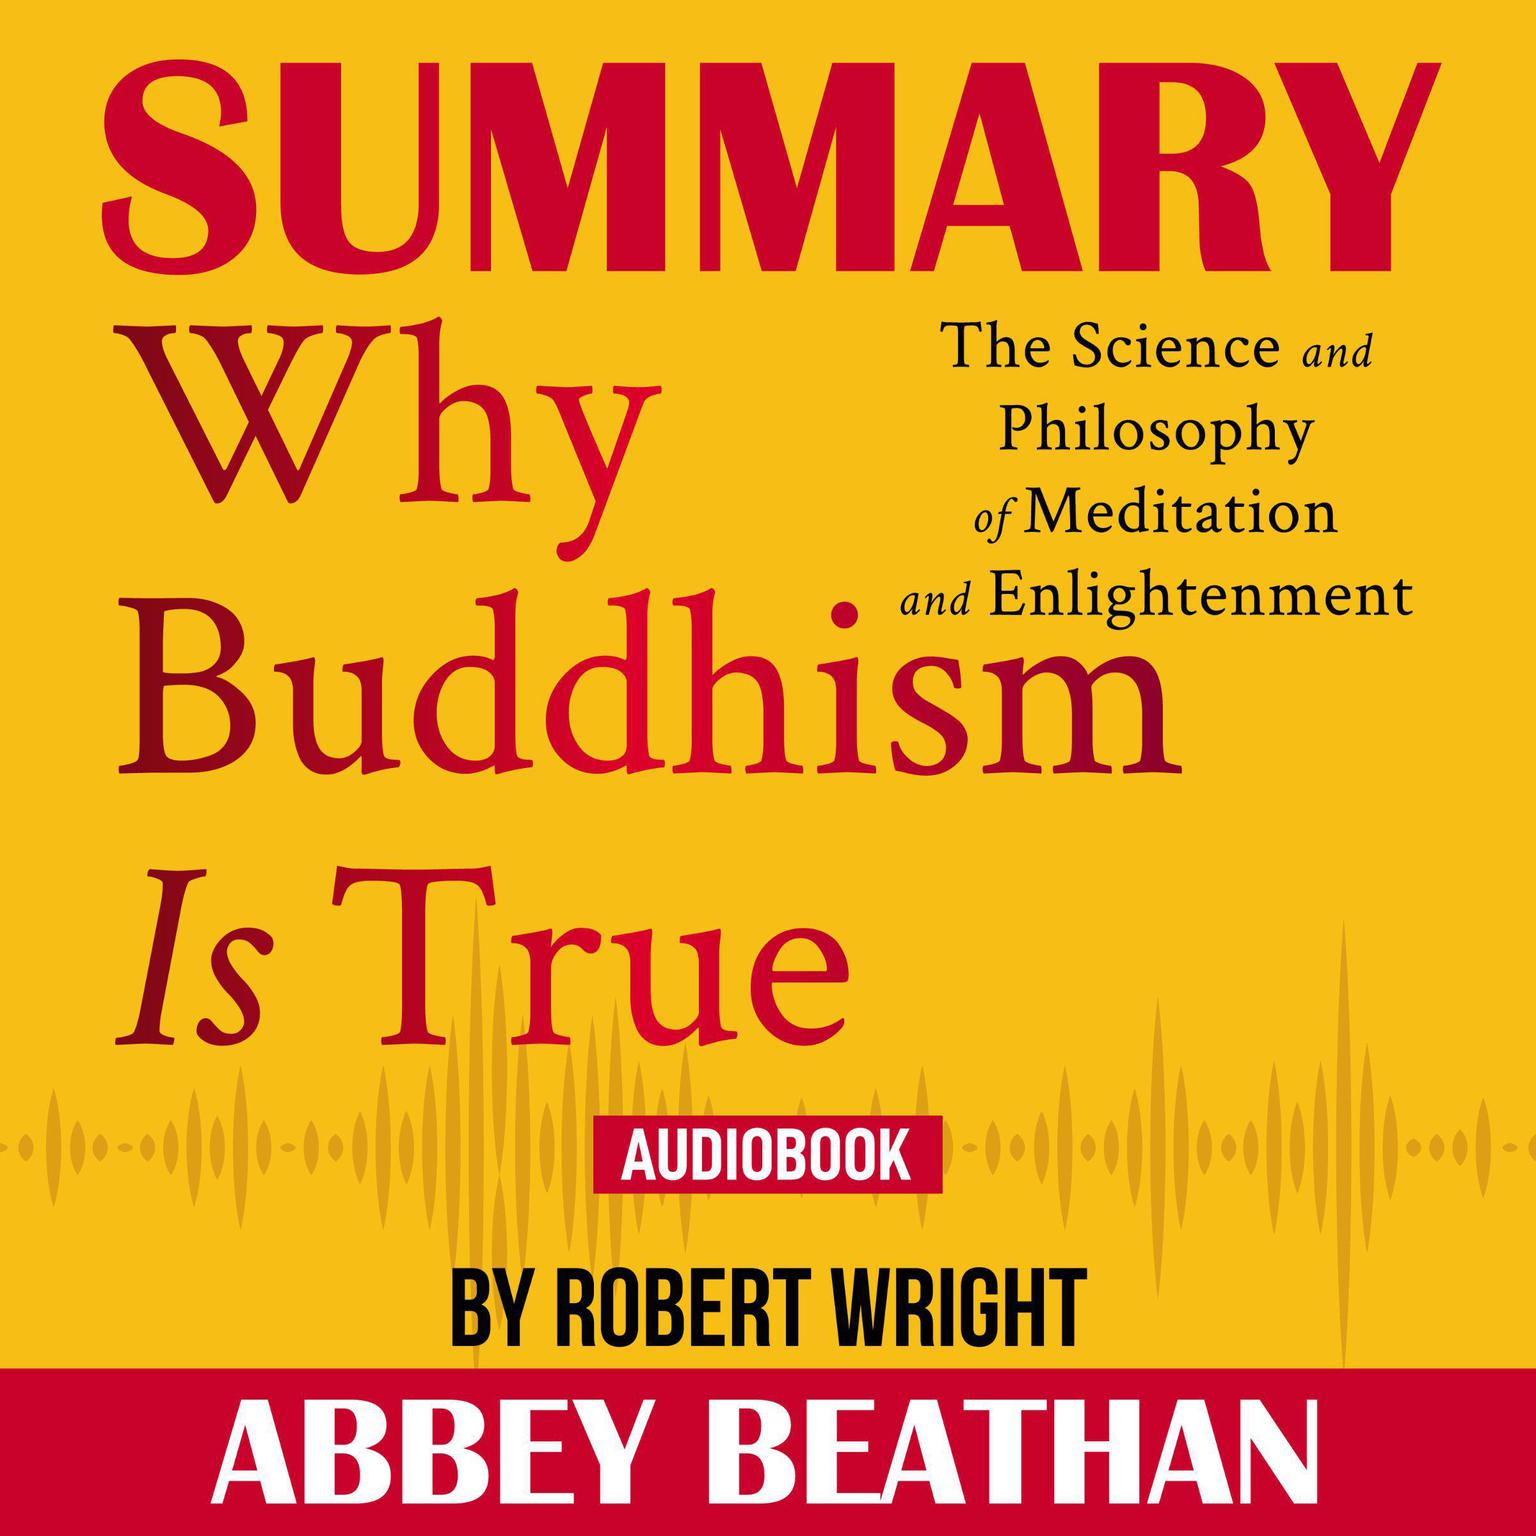 Summary of Why Buddhism is True: The Science and Philosophy of Meditation and Enlightenment by Robert Wright Audiobook, by Abbey Beathan